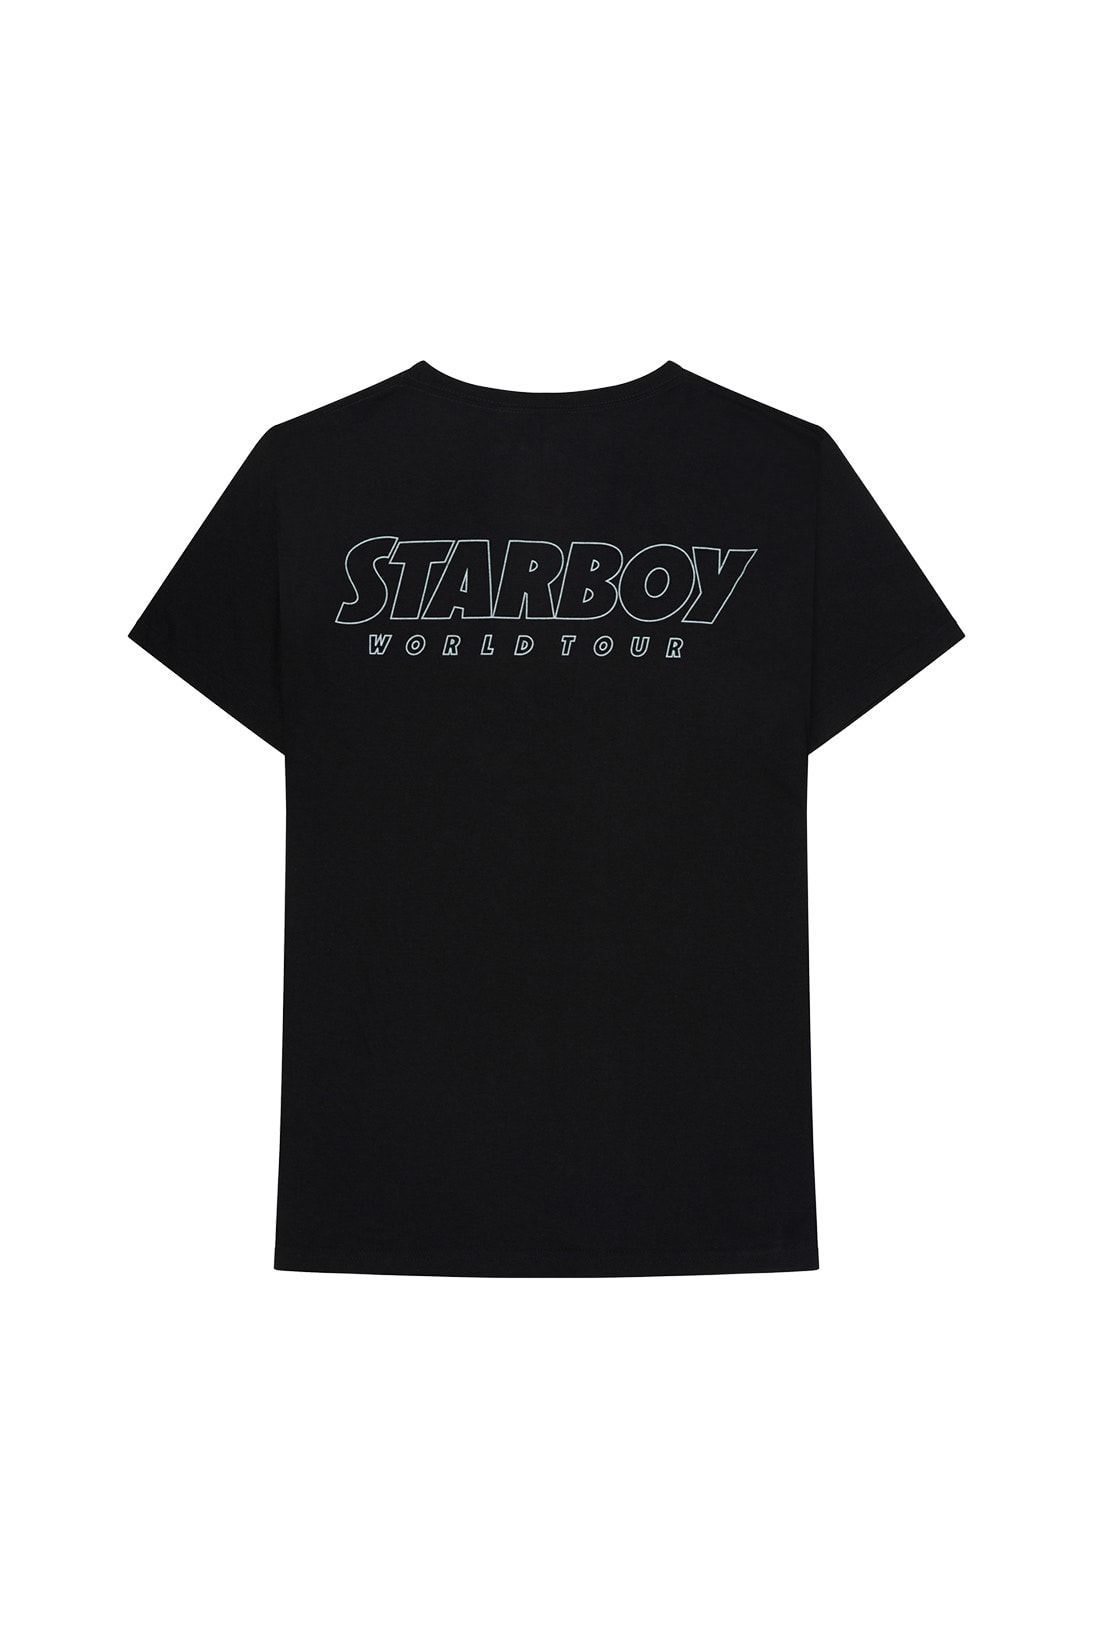 Shop Phase Two of The Weeknd's Starboy Merch | Hypebae